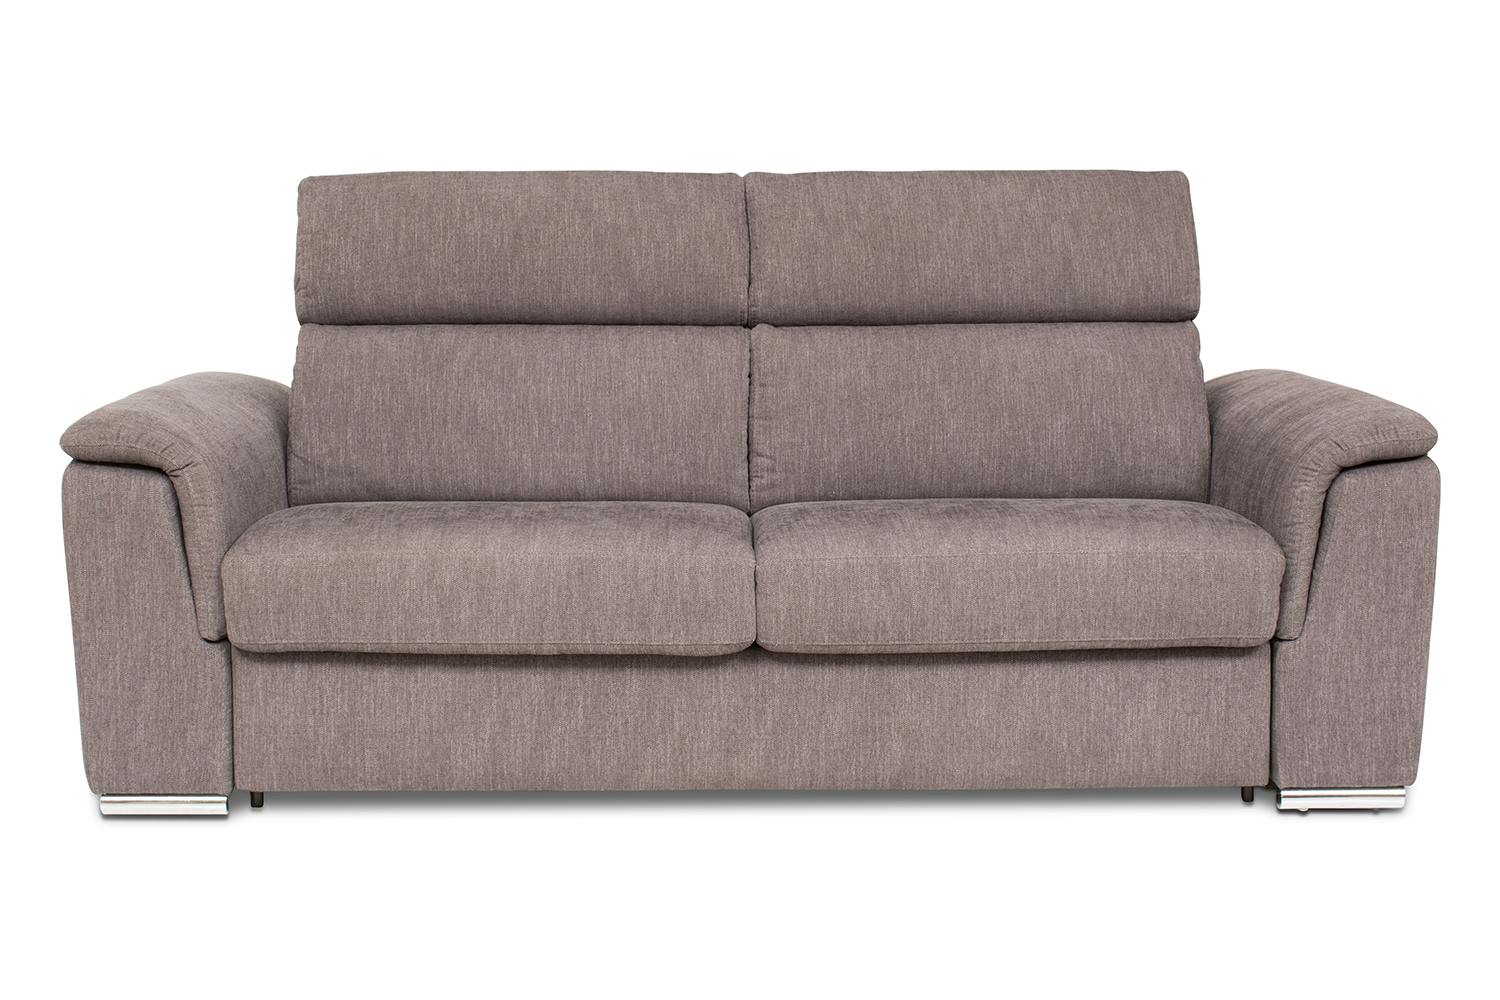 sofa beds for sale ireland